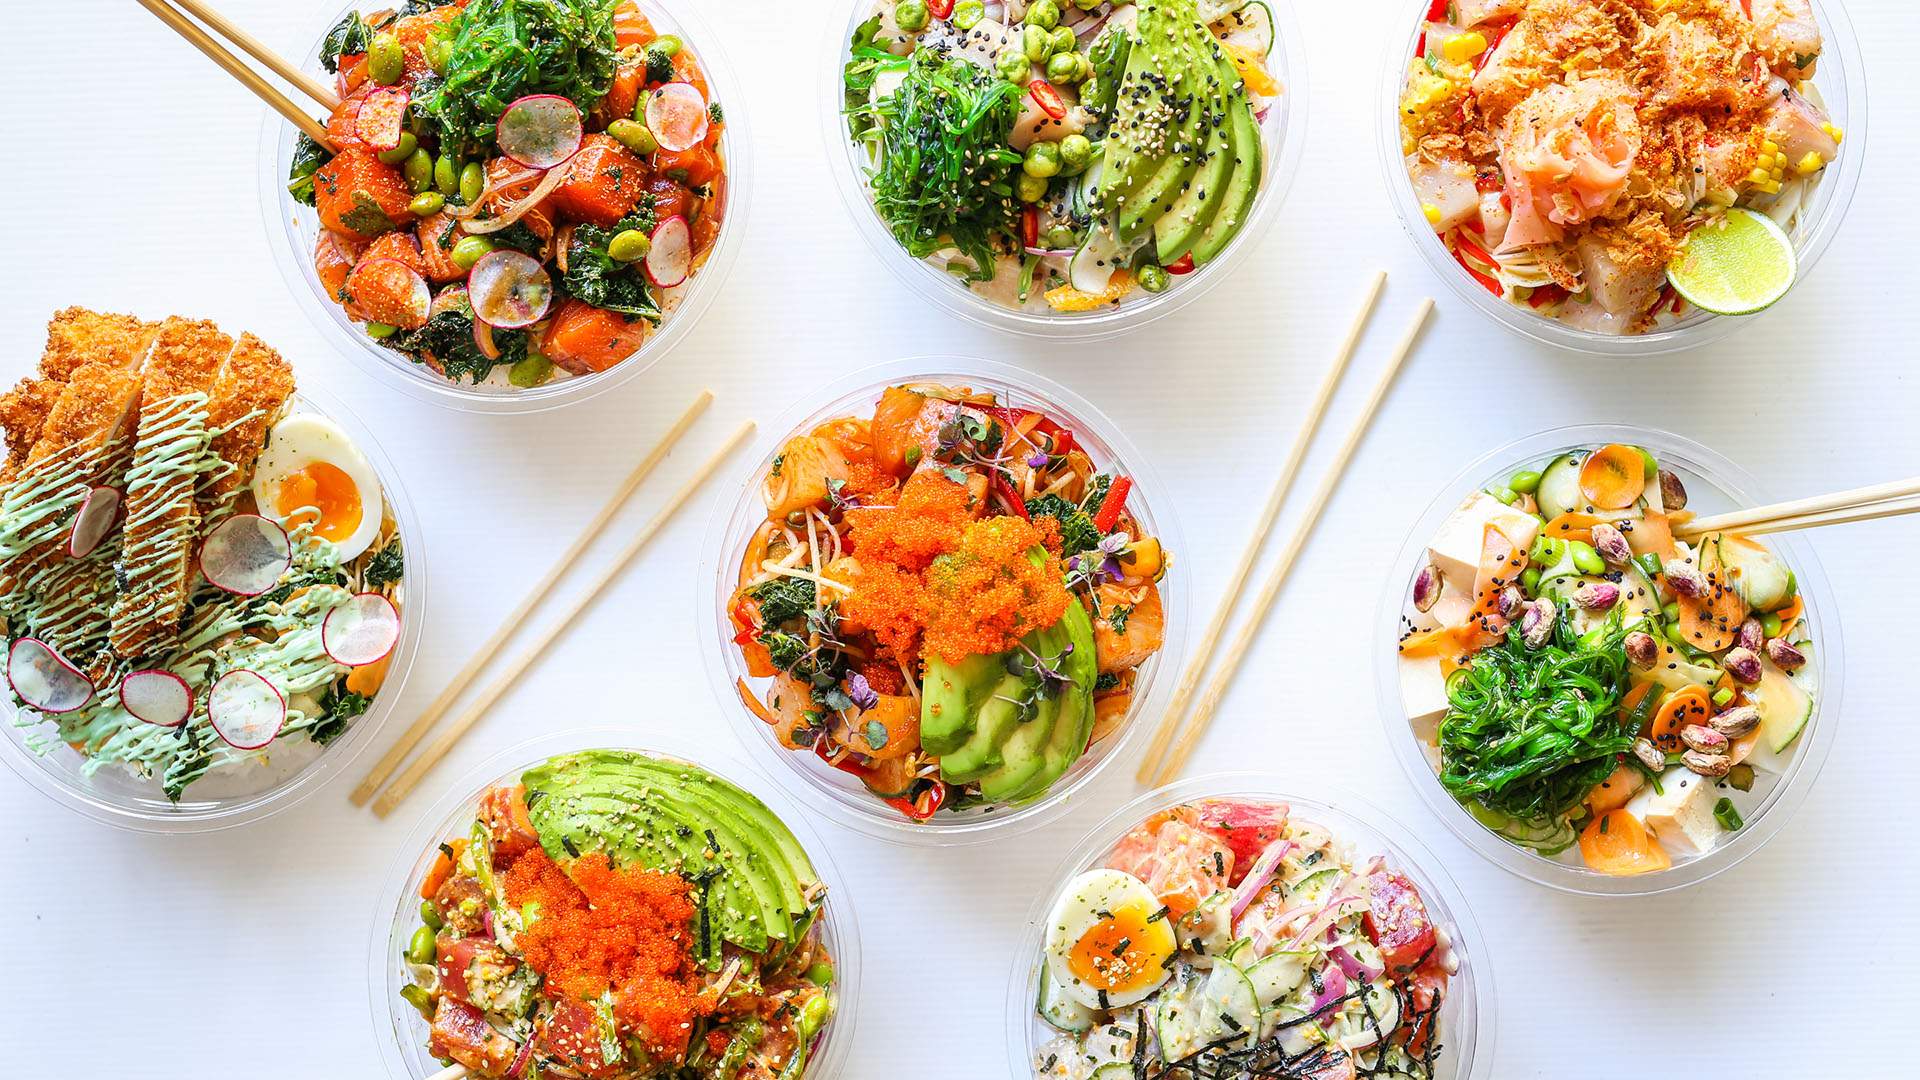 Suki's Make-Your-Own Poke Bowls and Sushi Burritos Are Coming to Bulimba